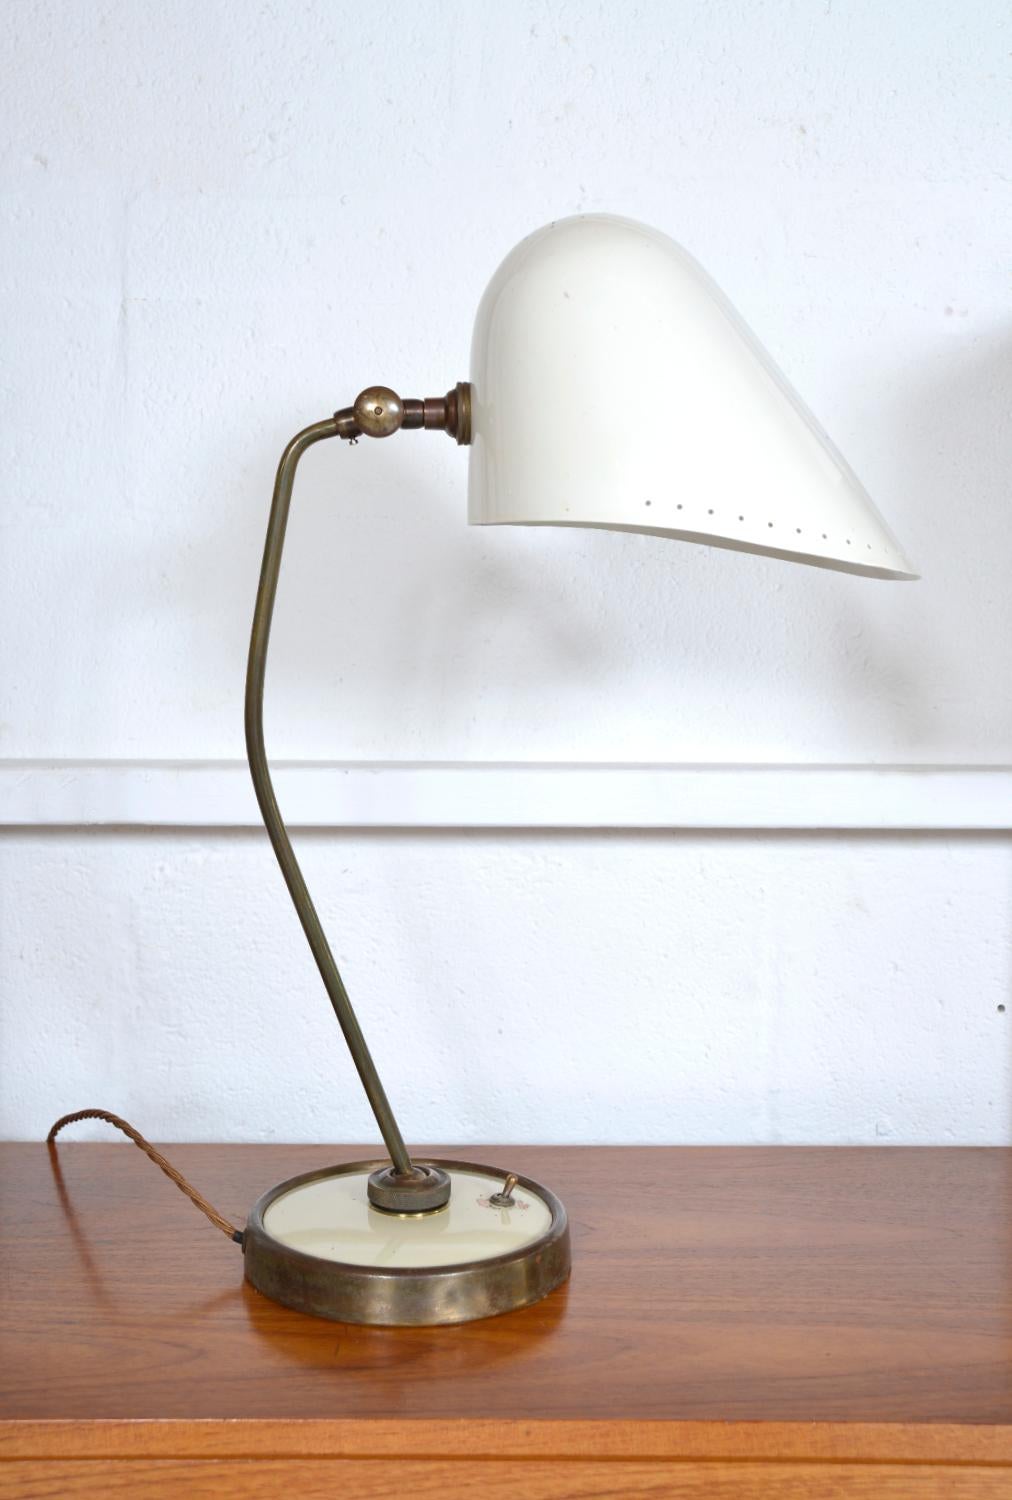 This scarce Postwar desk lamp was designed in 1946 by A.B. Read for Troughton and Young. The “Versalite” range was first shown at the 'Design at Work' exhibition in 1948 and then went on to be widely used throughout the interior decor scheme in the